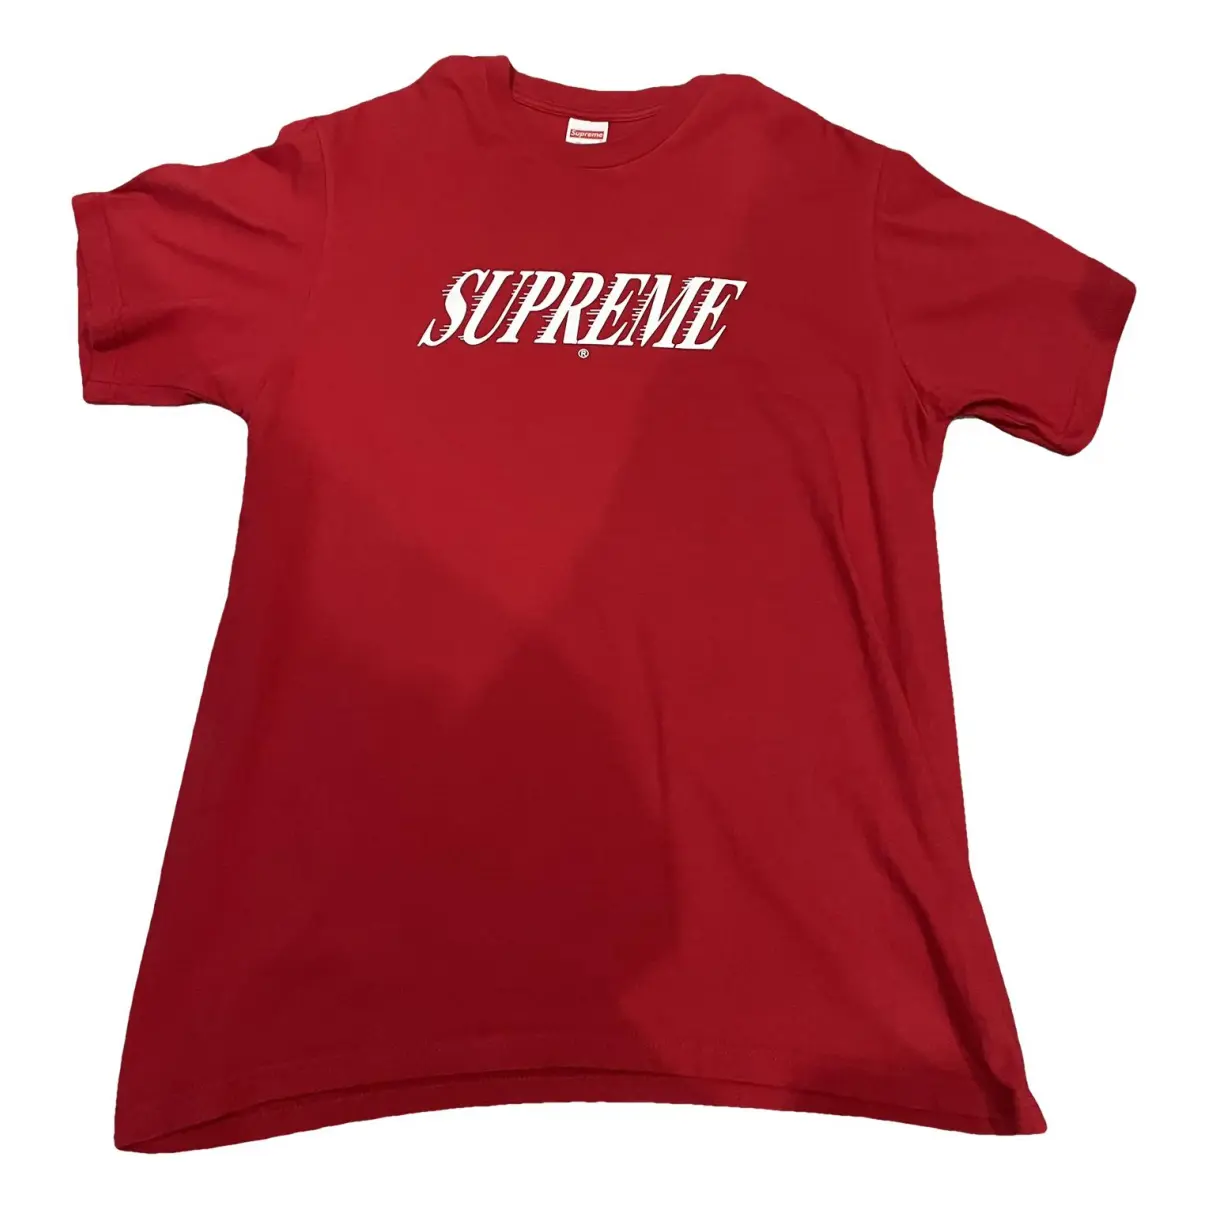 T-shirt Supreme Red size M International in Cotton - 39977844